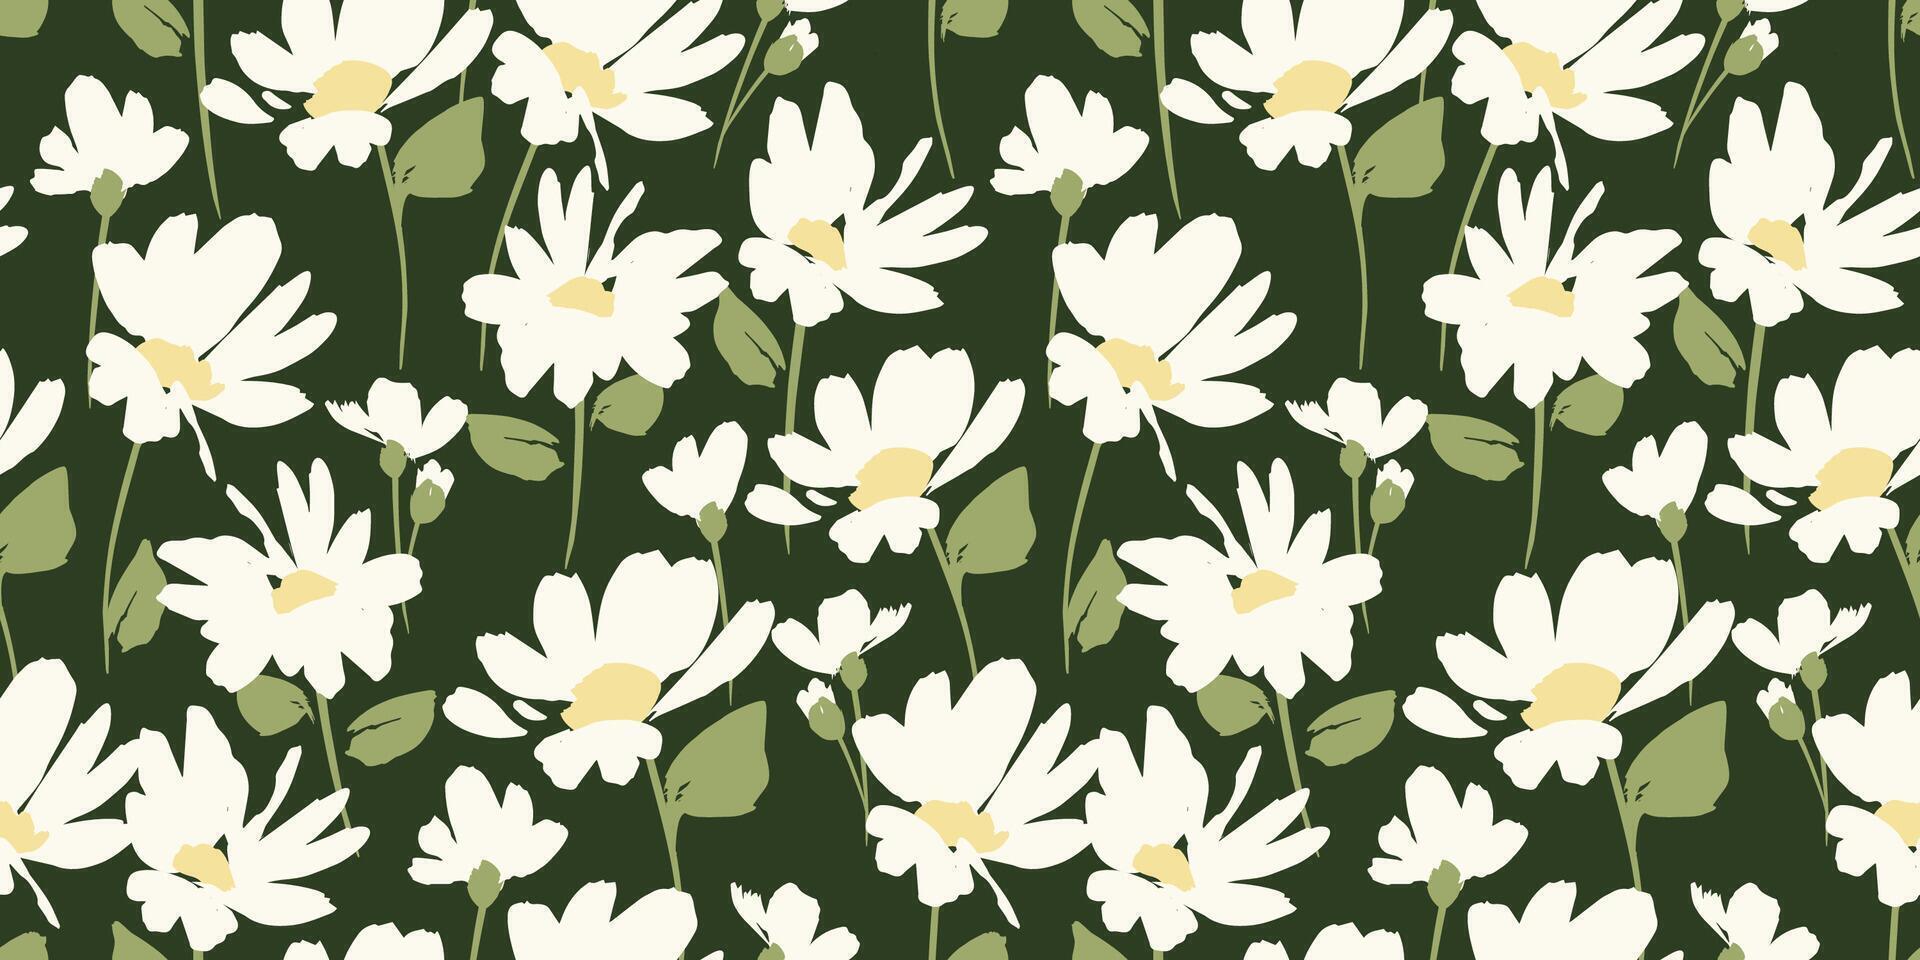 Abstract floral seamless pattern with chamomile. Trendy hand drawn textures. Modern abstract design for,paper, cover, fabric and other use vector